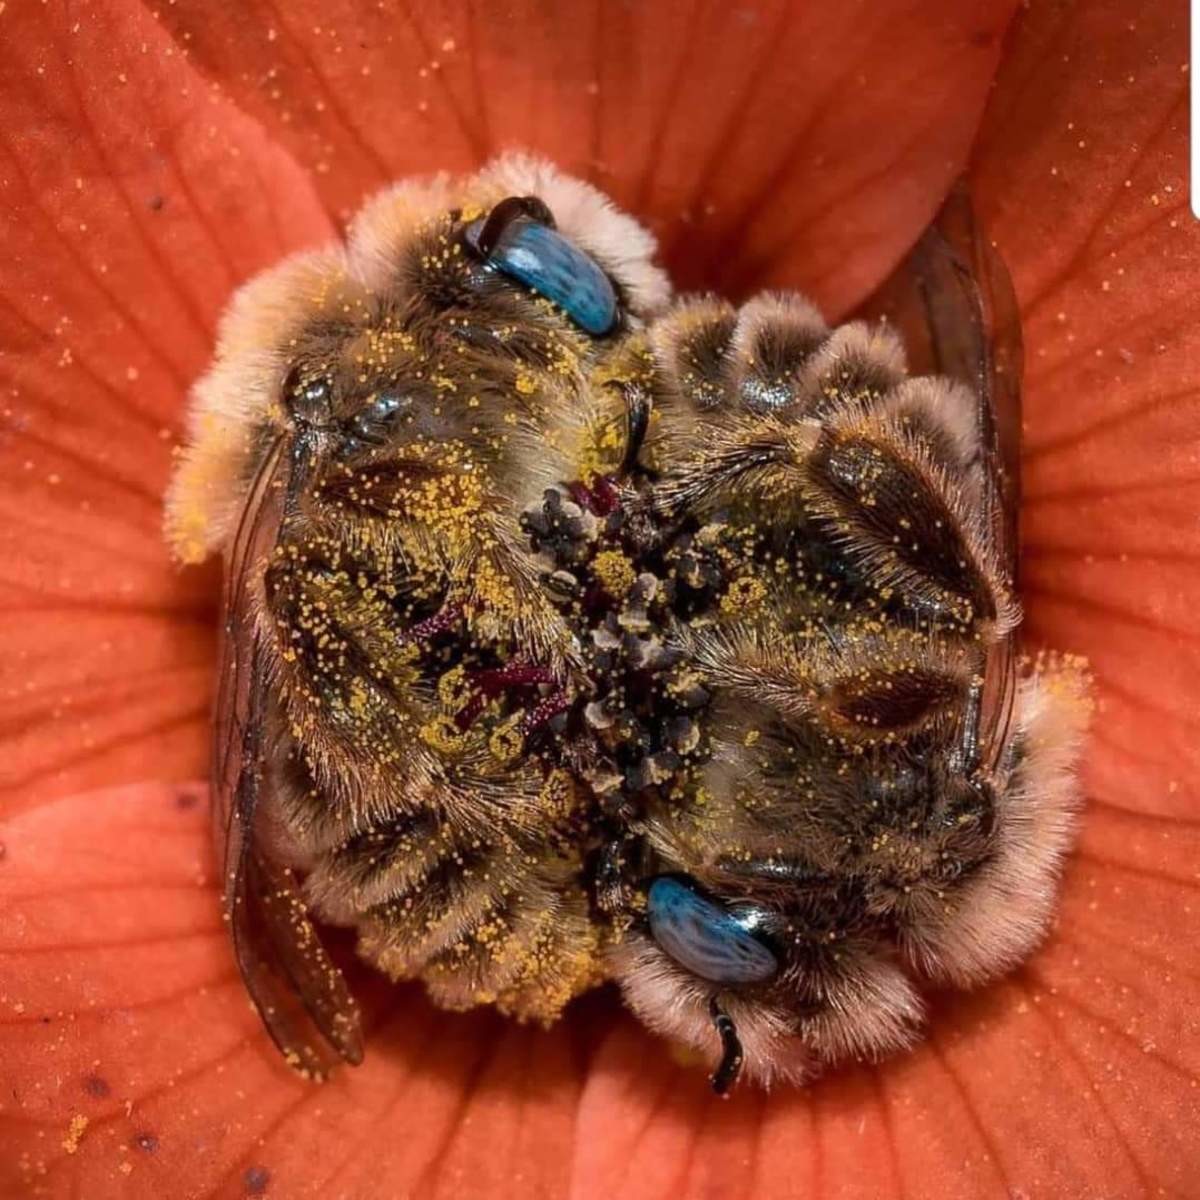 How bees sleep.. Photo by Joe Neely.. Imagine how terrible life must be if you could not close your eyes when you sleep like these insects, almost feel sorry for them.